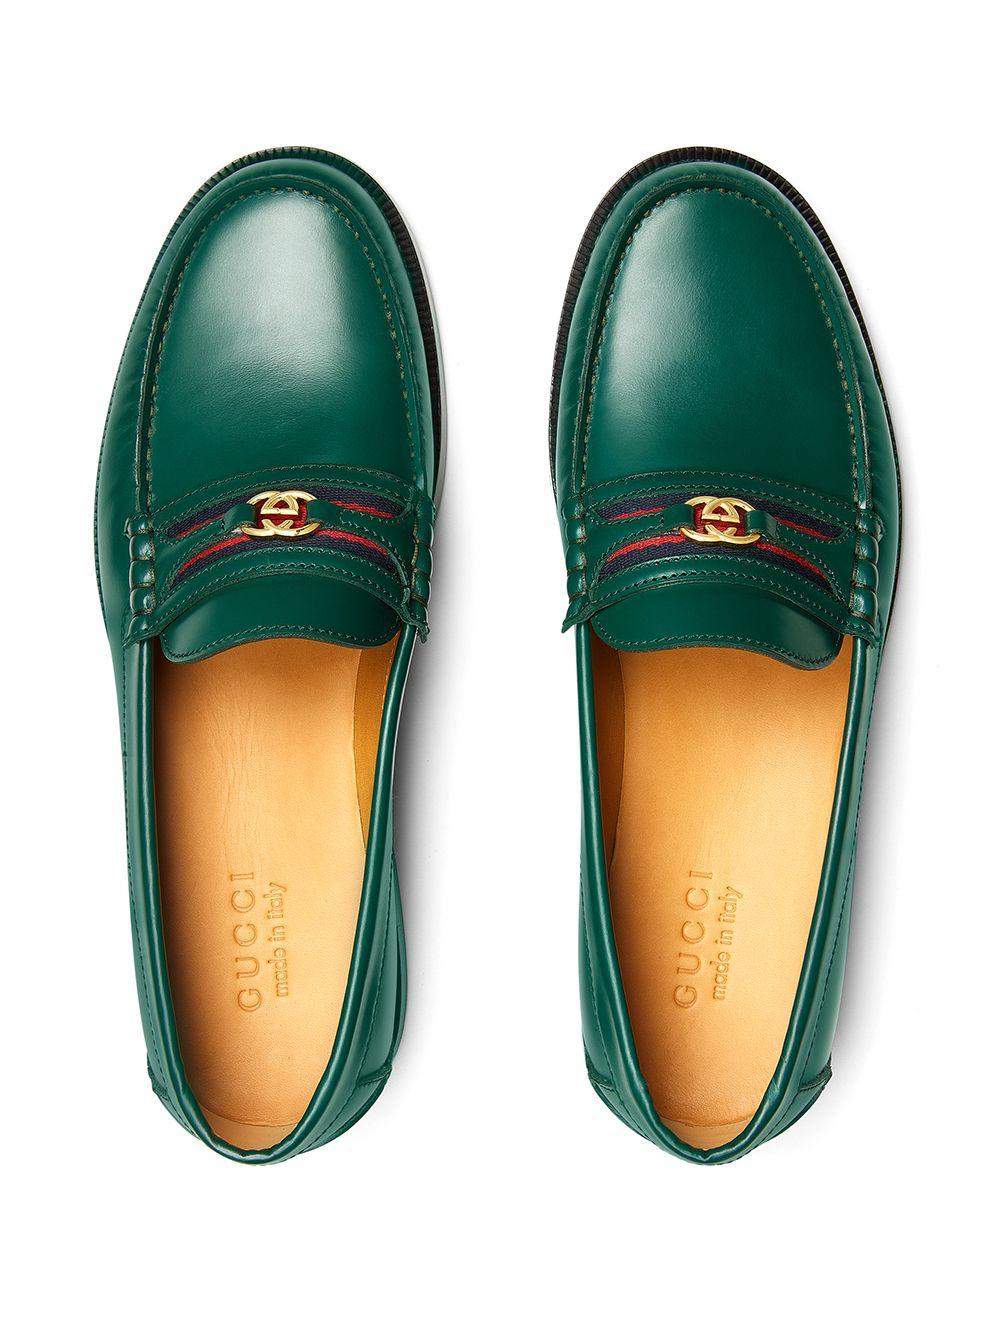 Gucci Double G Leather Loafers in Green for Men - Lyst